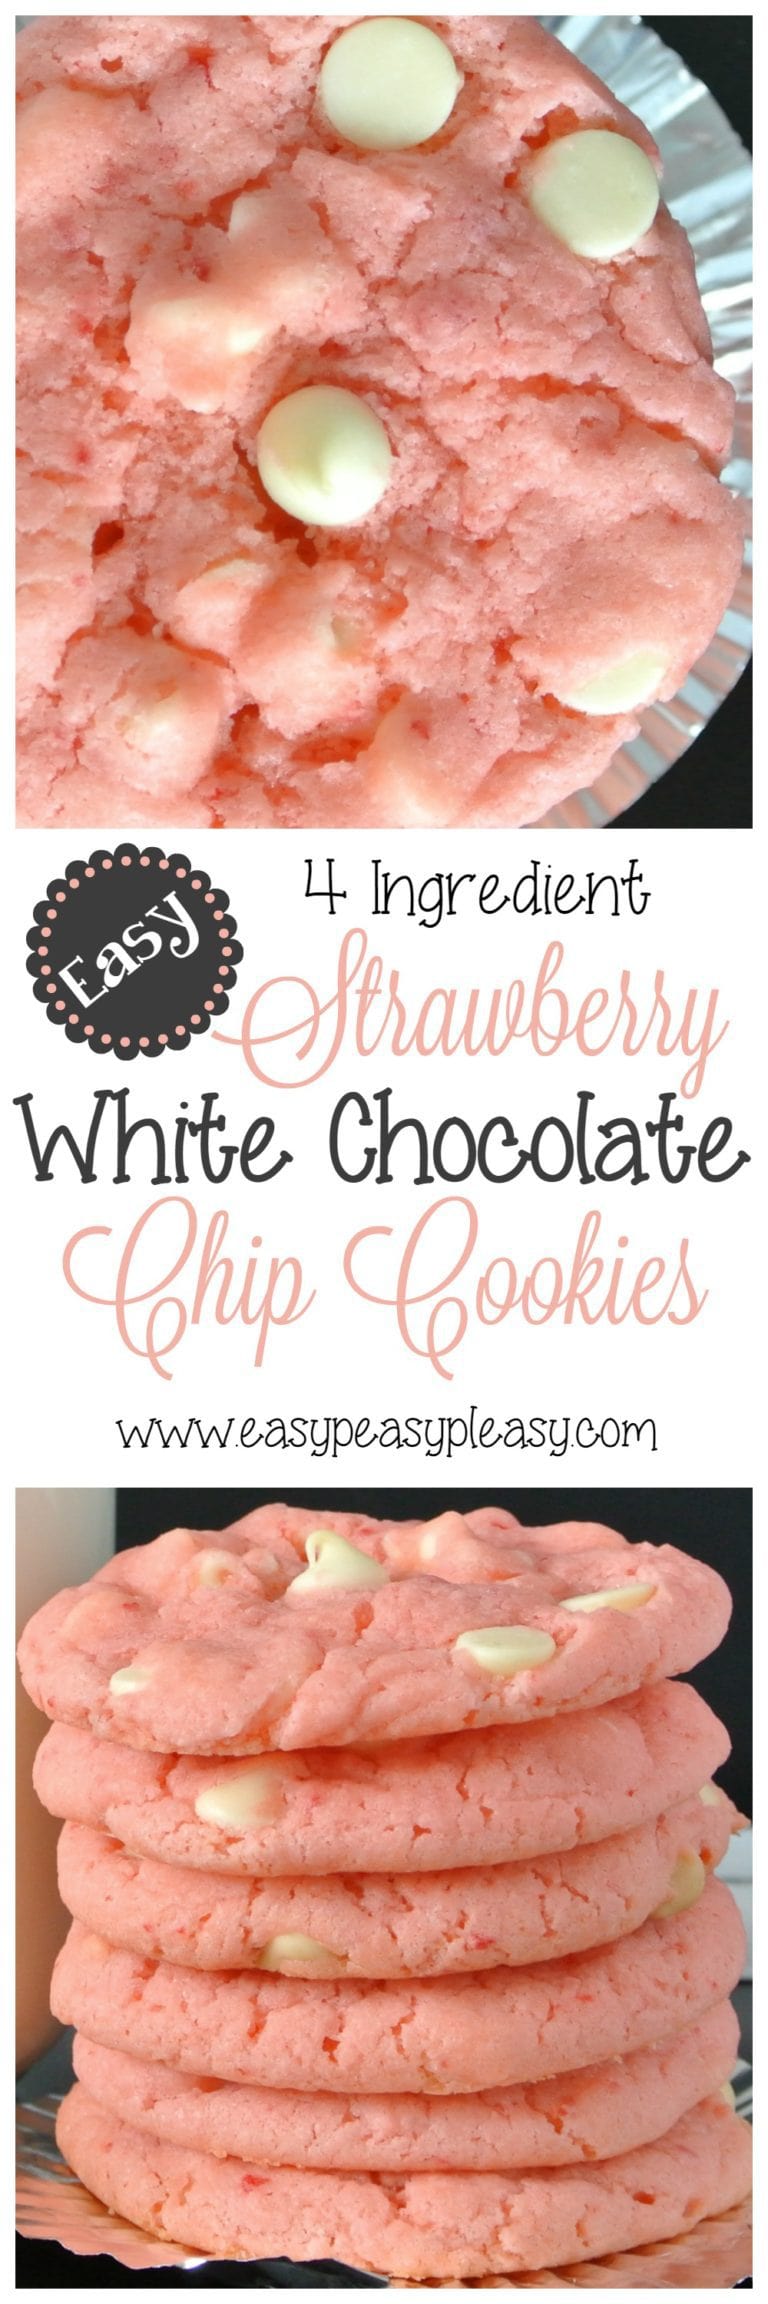 4 Ingredient Strawberry White Chocolate Chip Cookies - Easy Peasy Pleasy